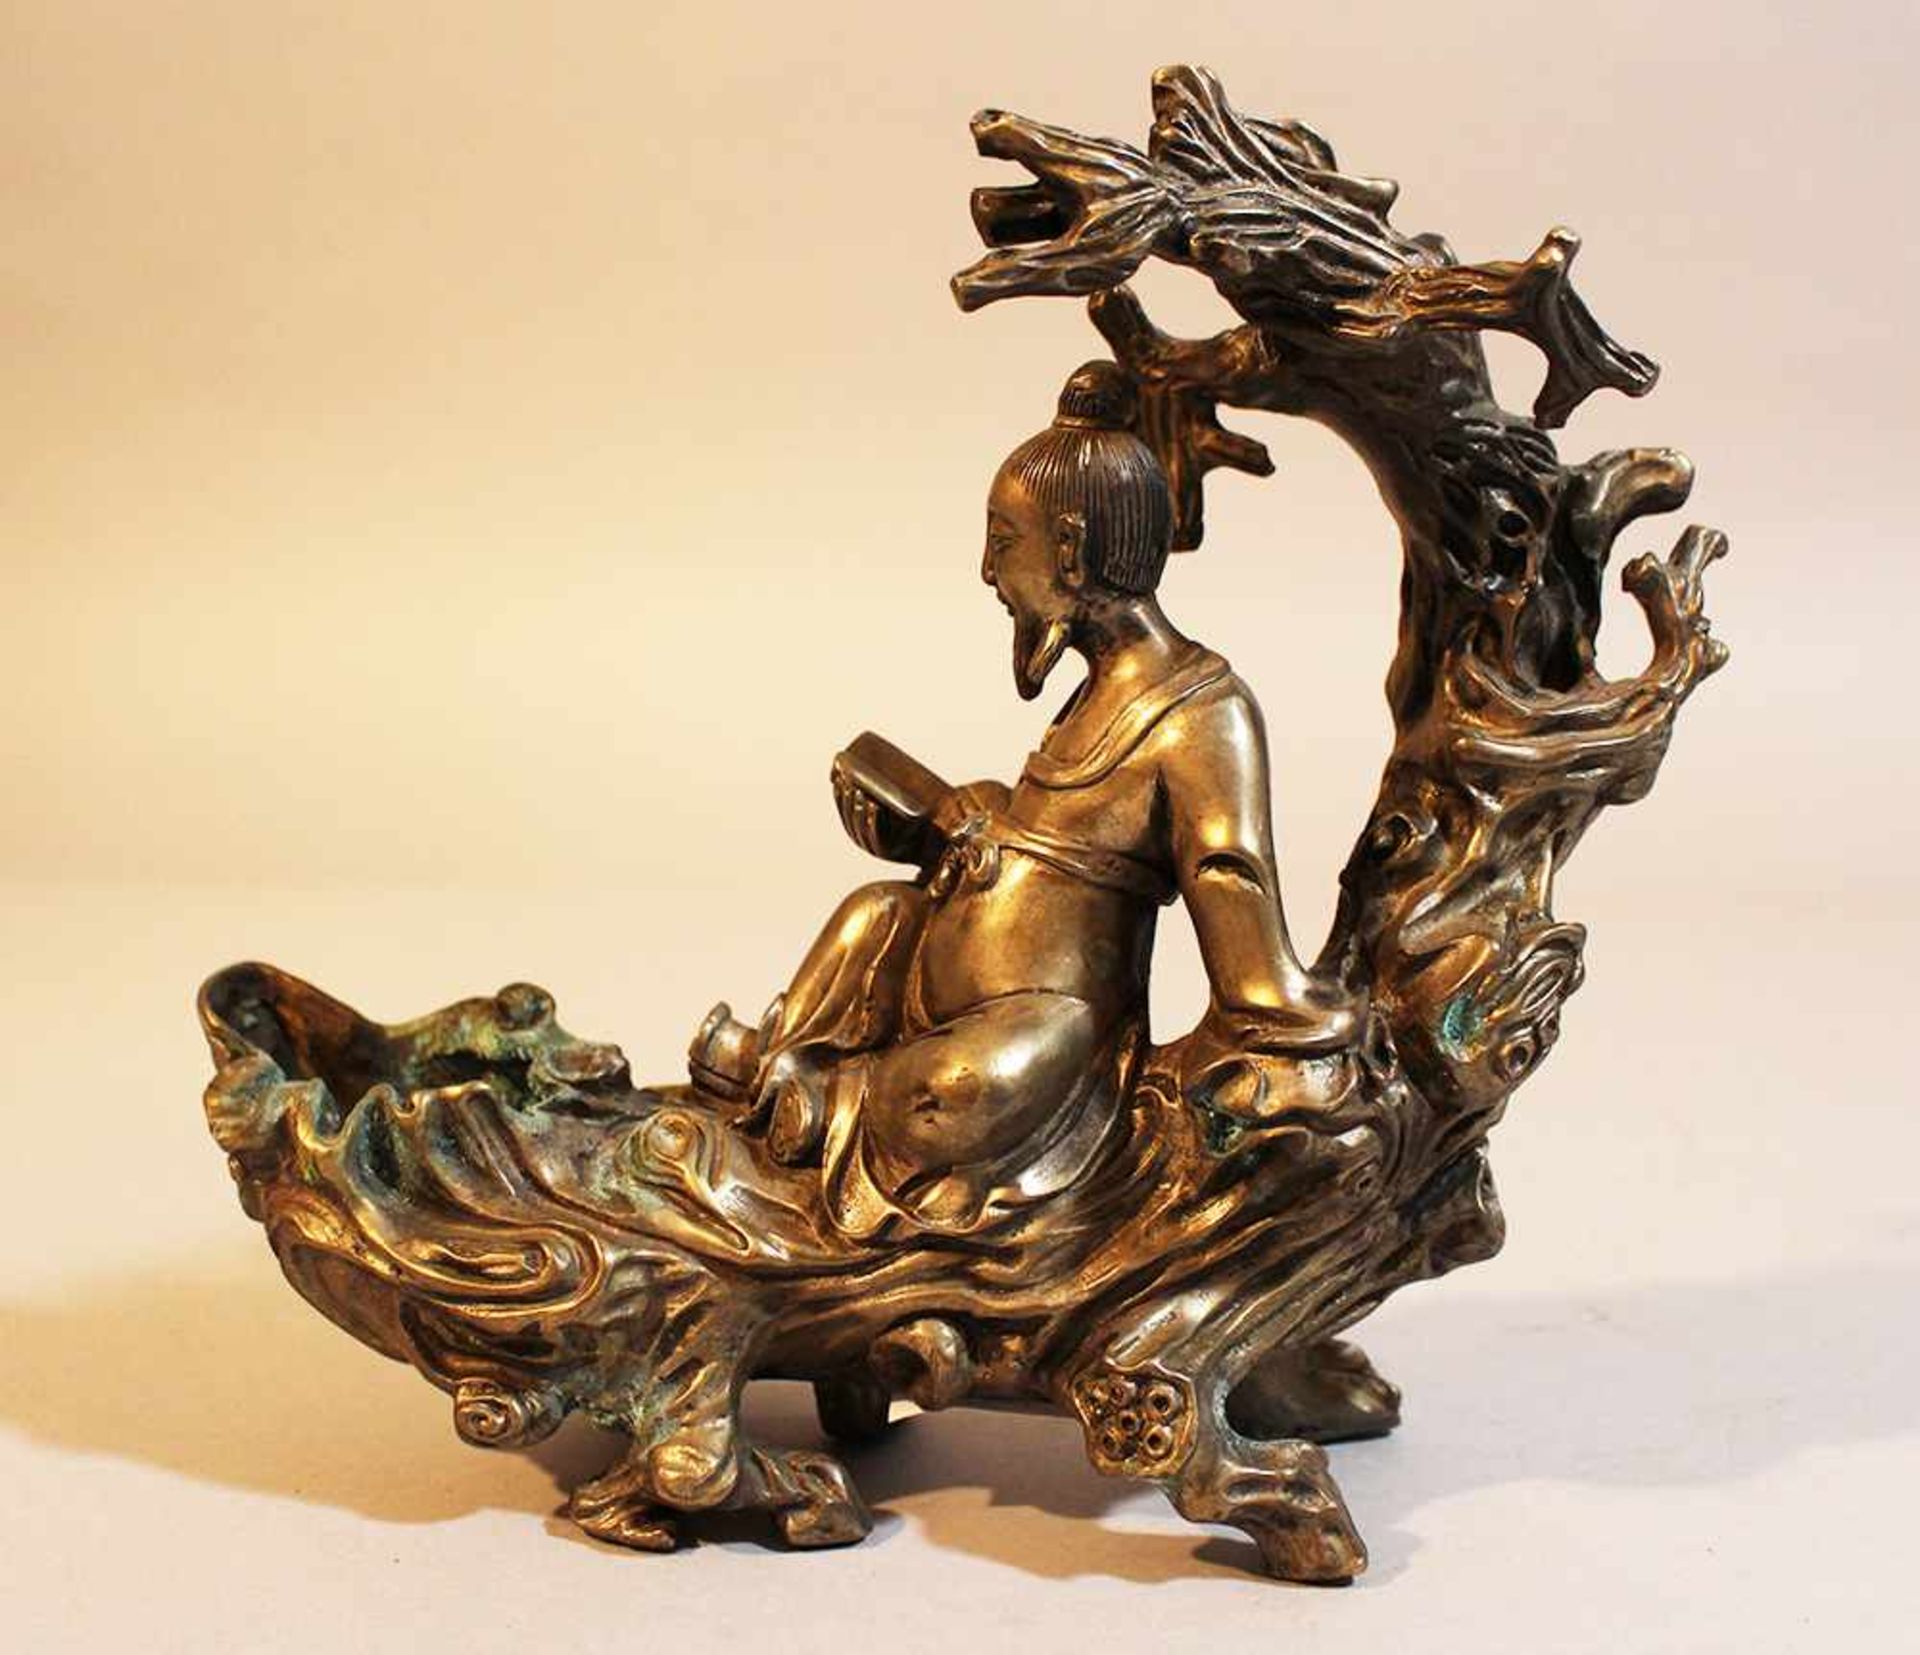 Chinese Sculpture, Bronze,silvered, Qing Dynasty20cmThis is a timed auction on our German portal